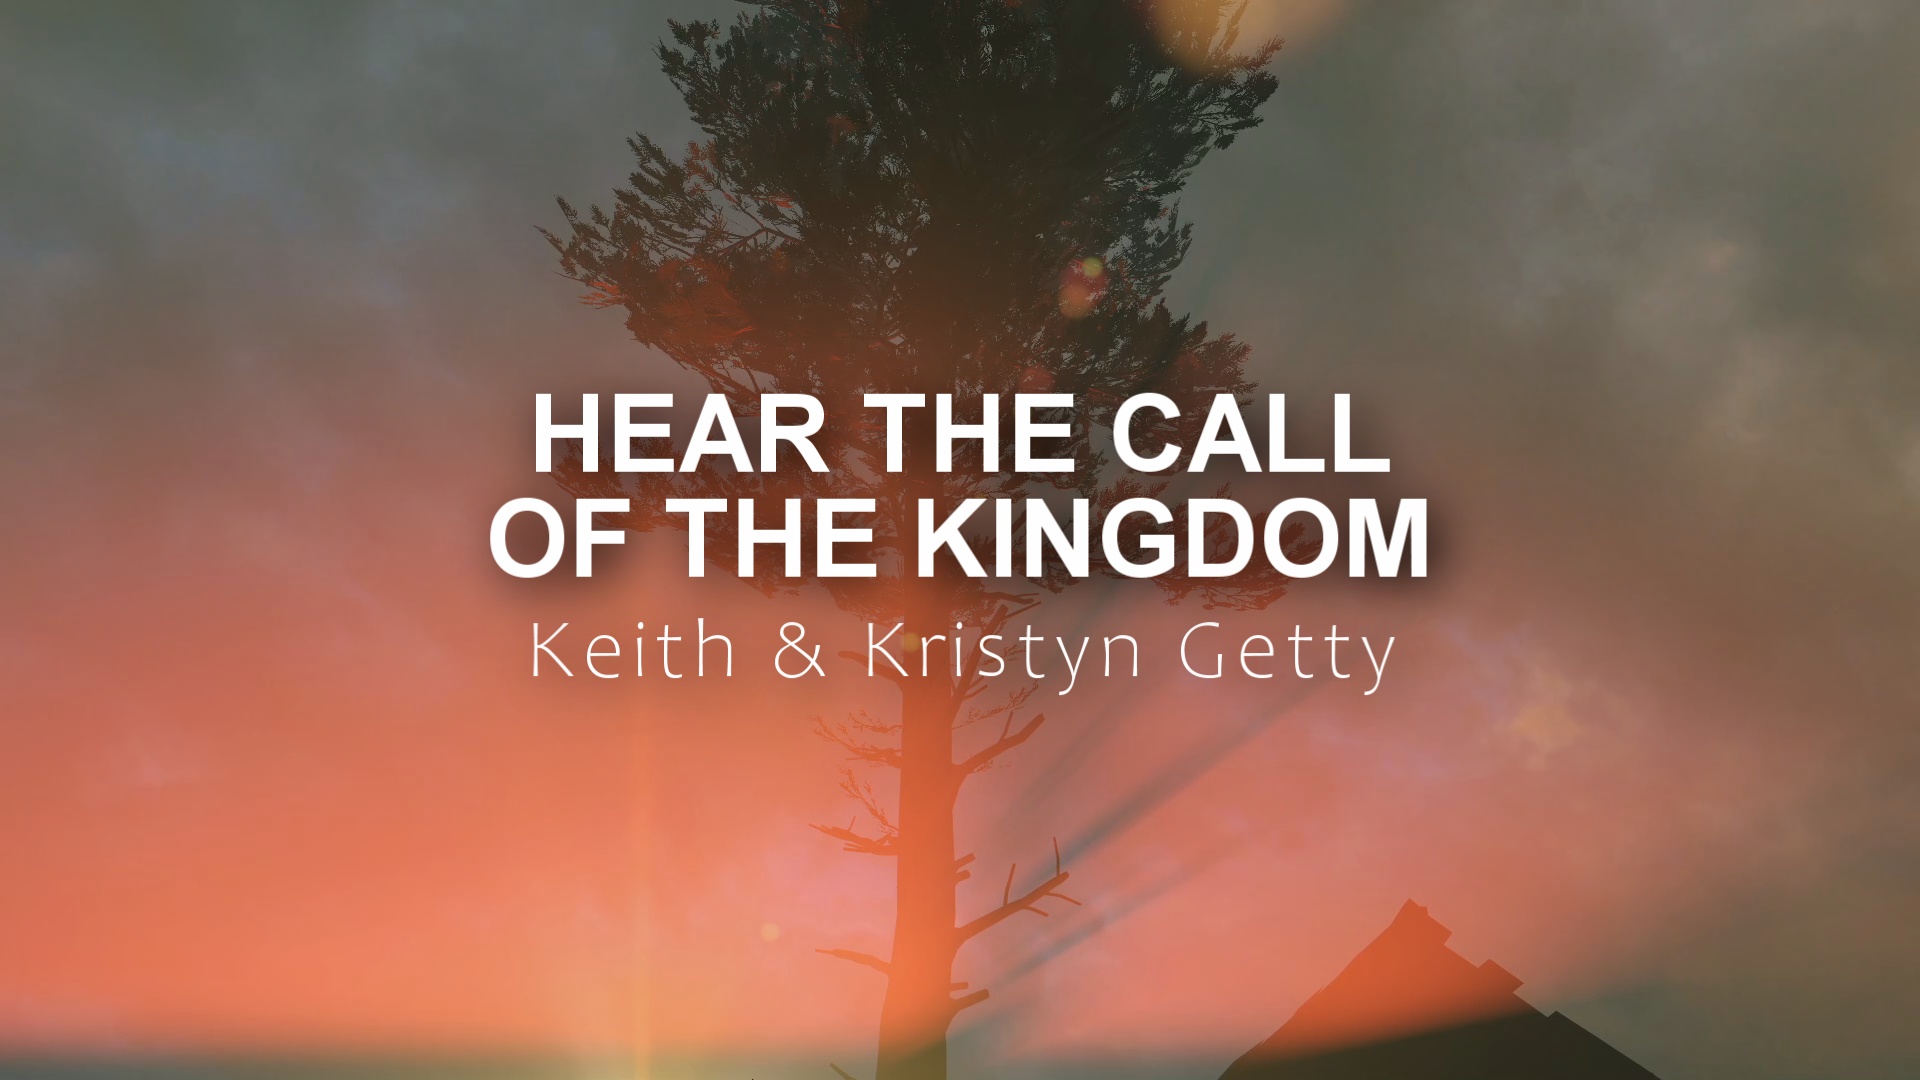 Hear the call of the kingdom